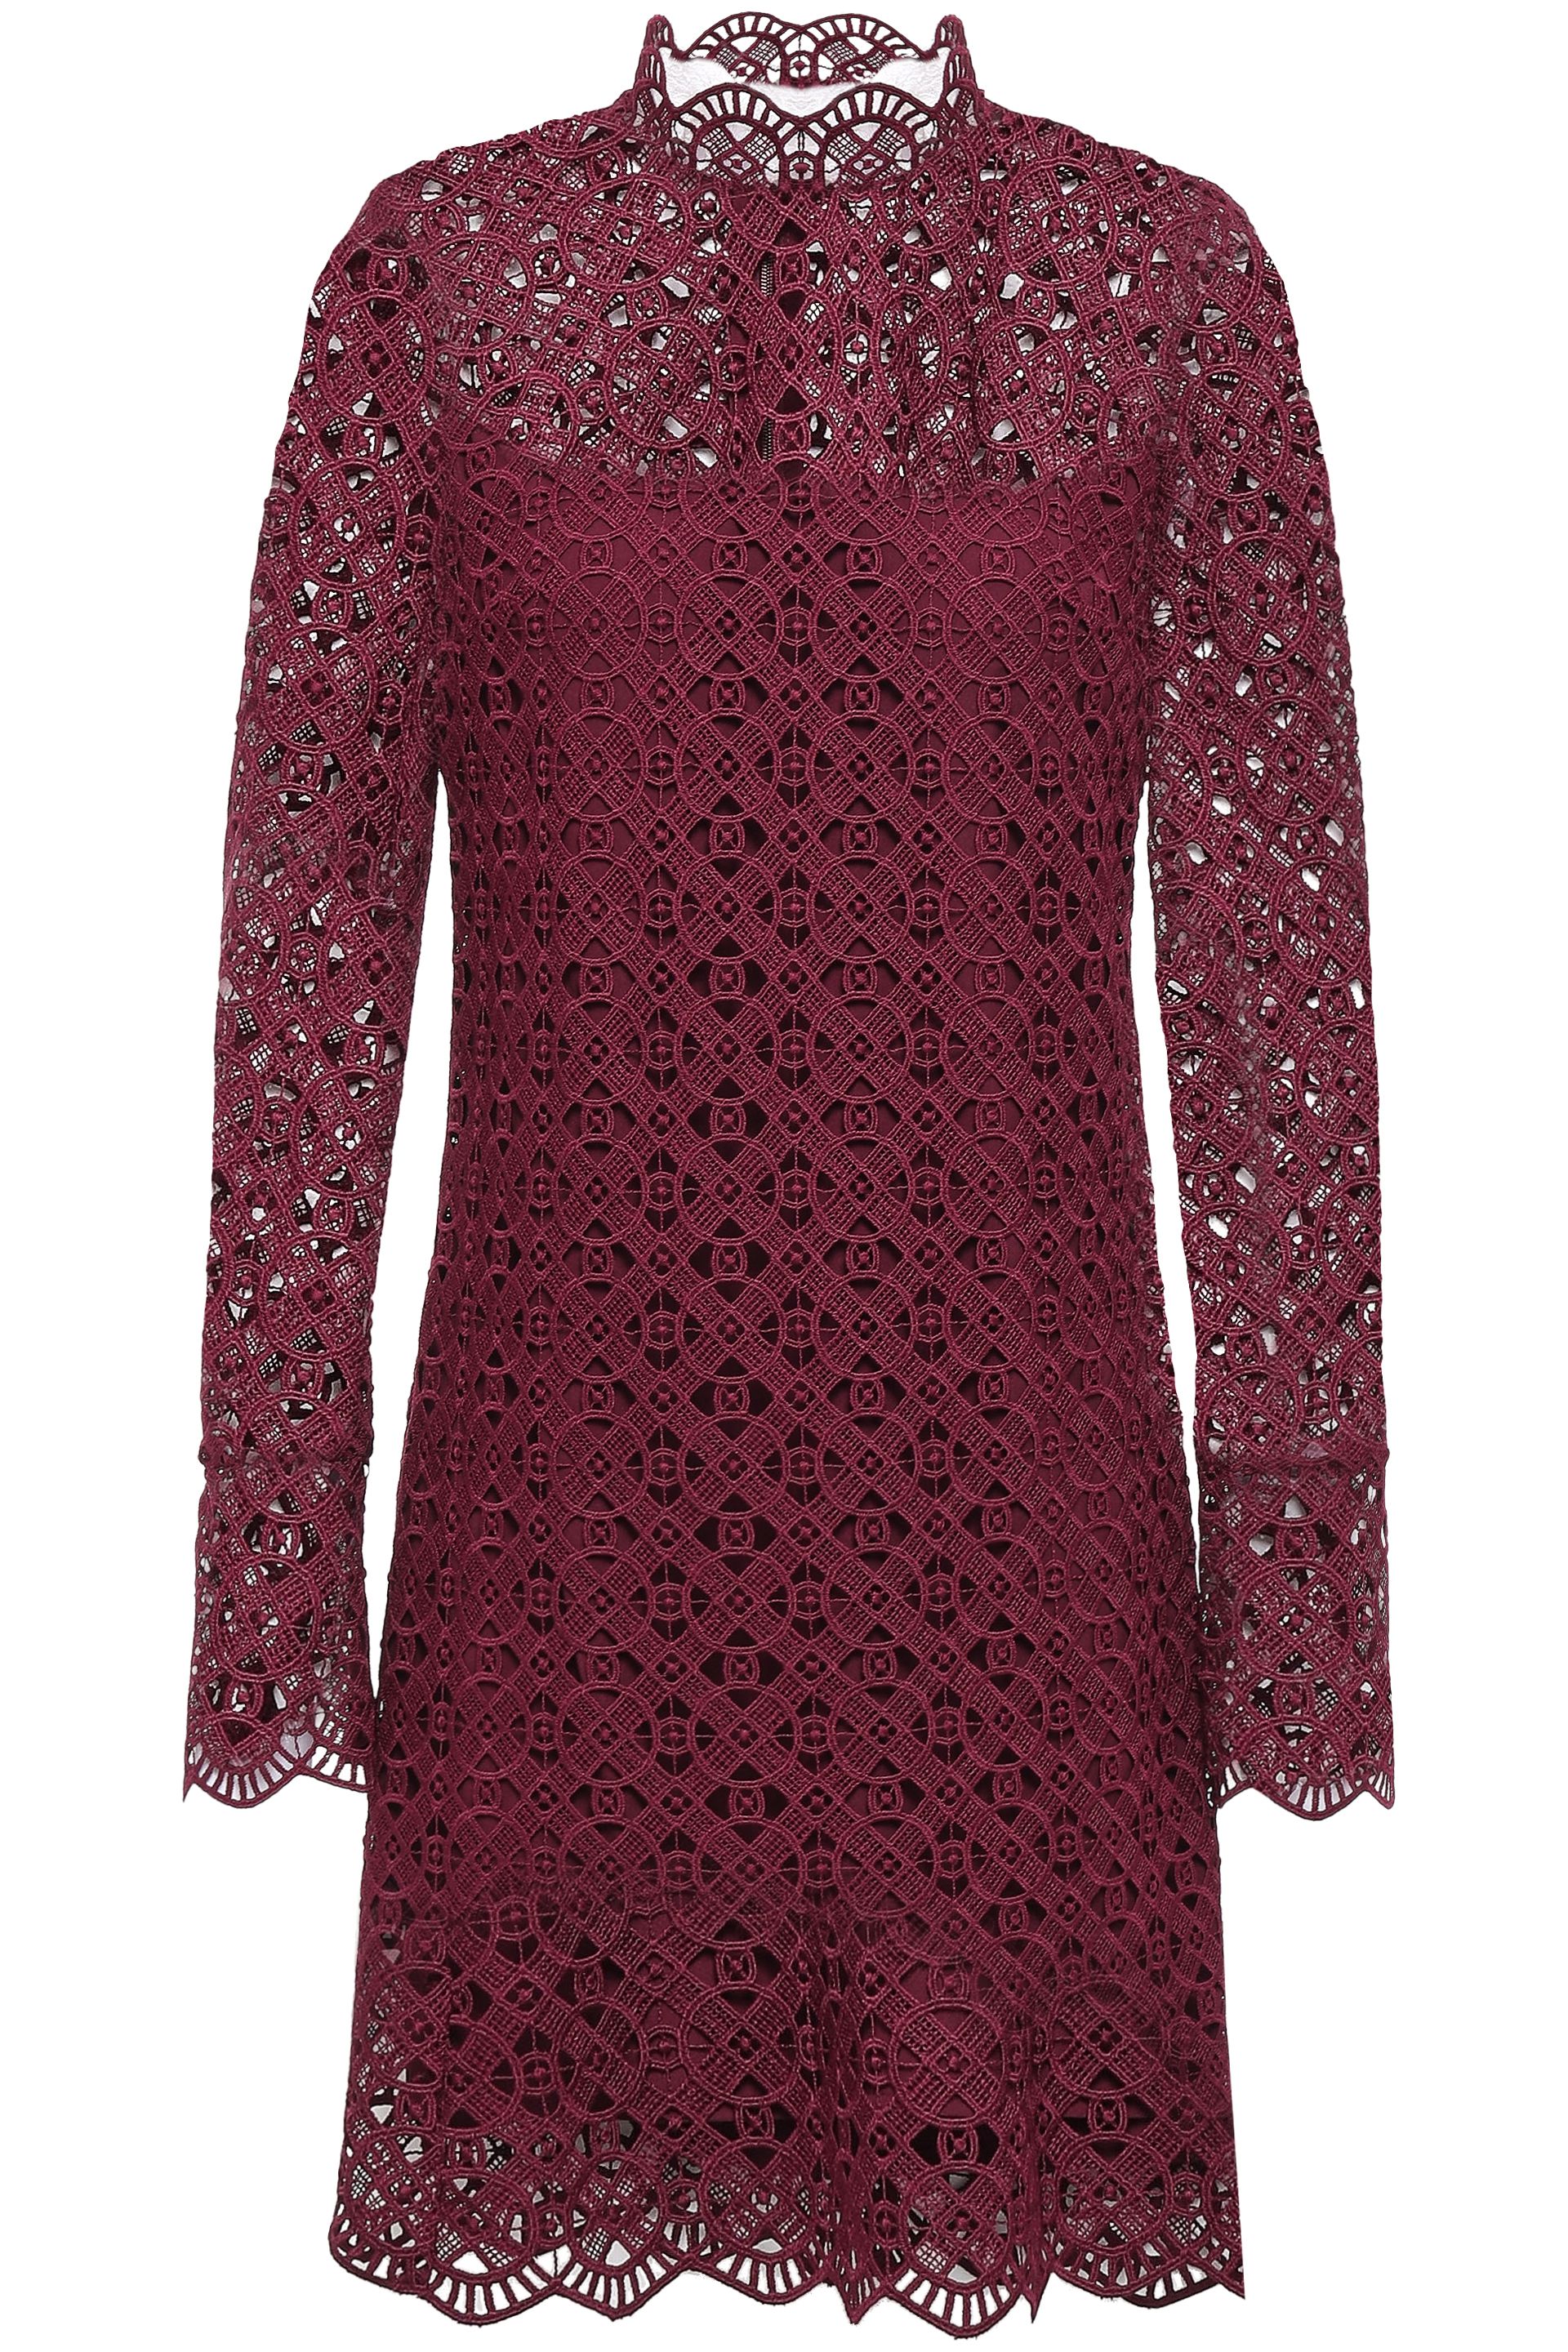 Designer Lace Dresses | Sale Up To 70% Off At THE OUTNET